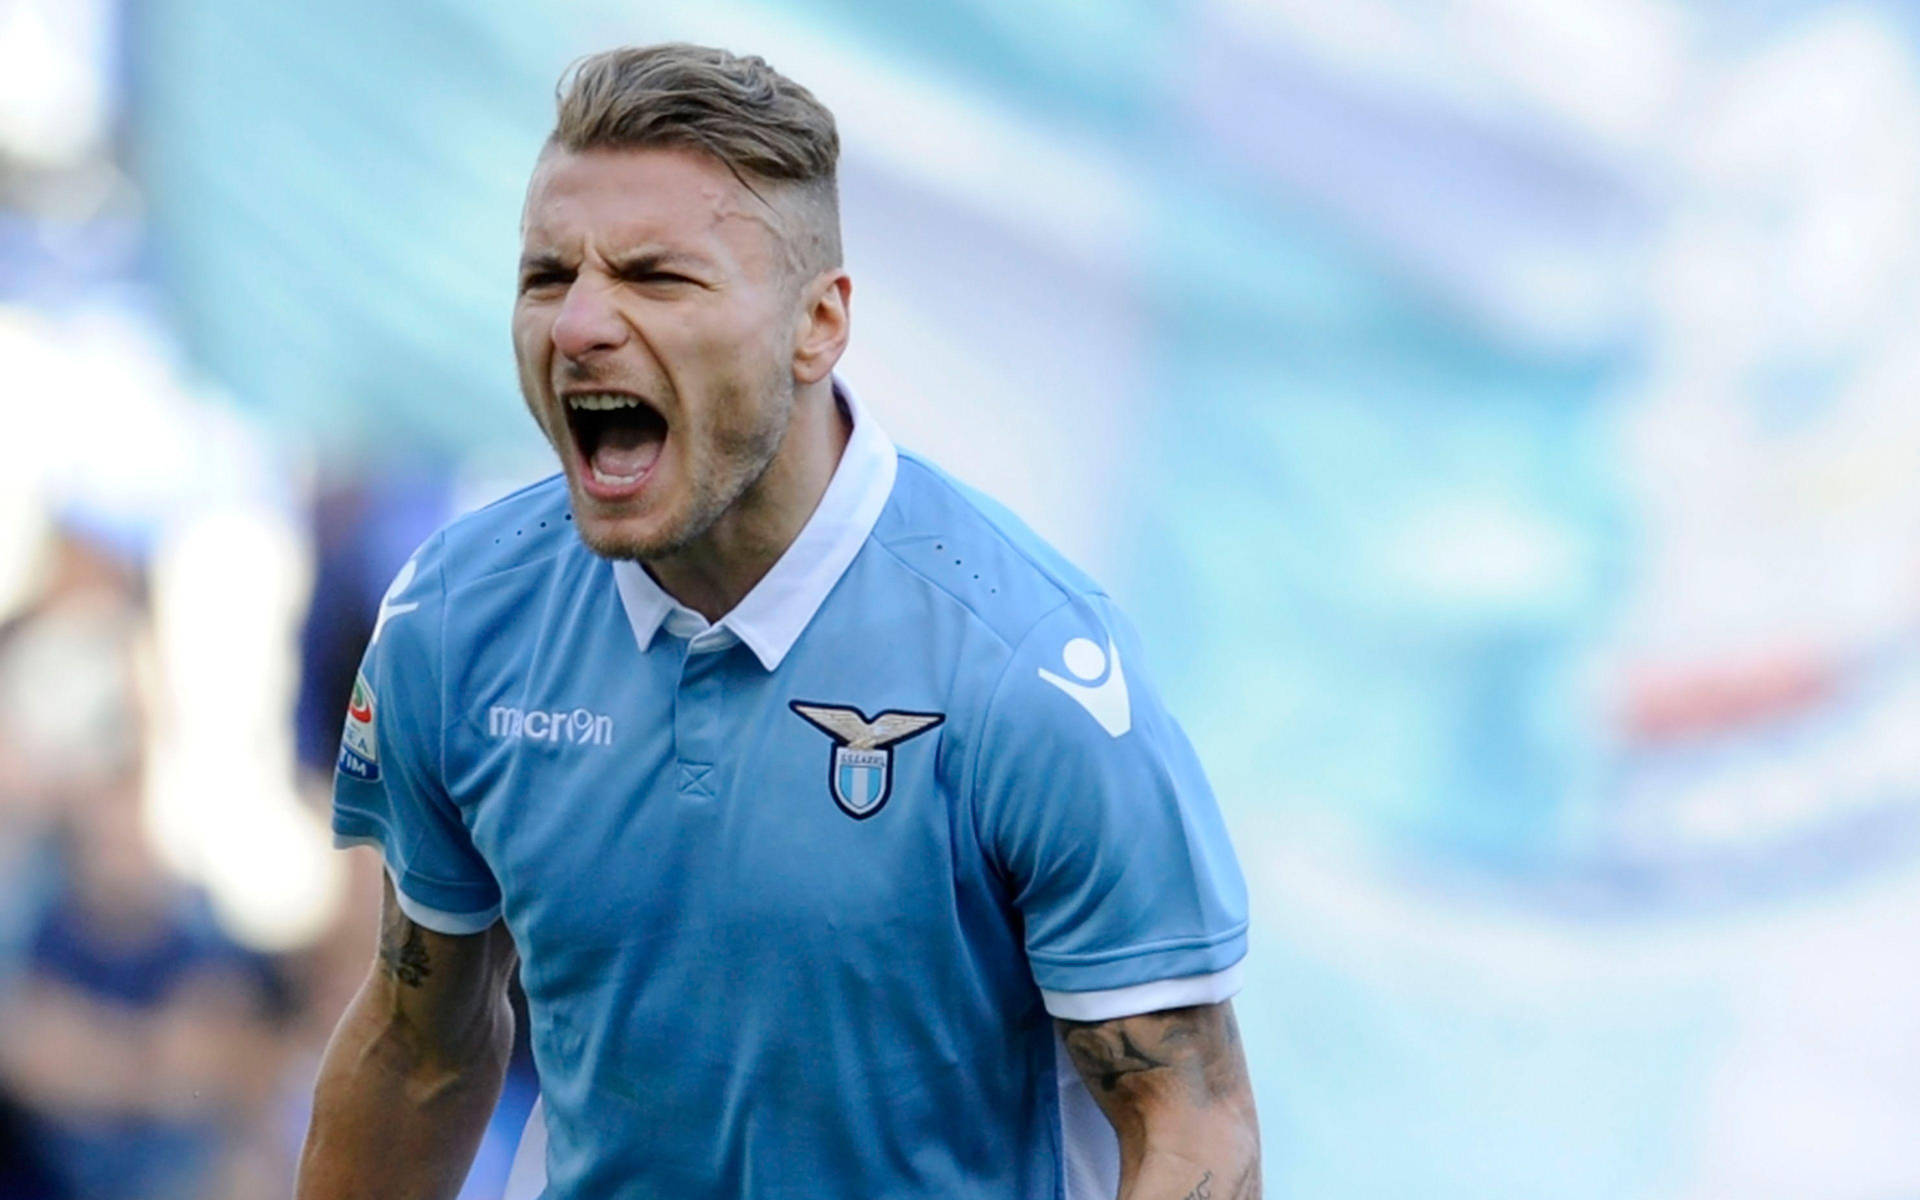 Ciro Immobile In Action: Scoring Goals With Finesse Background